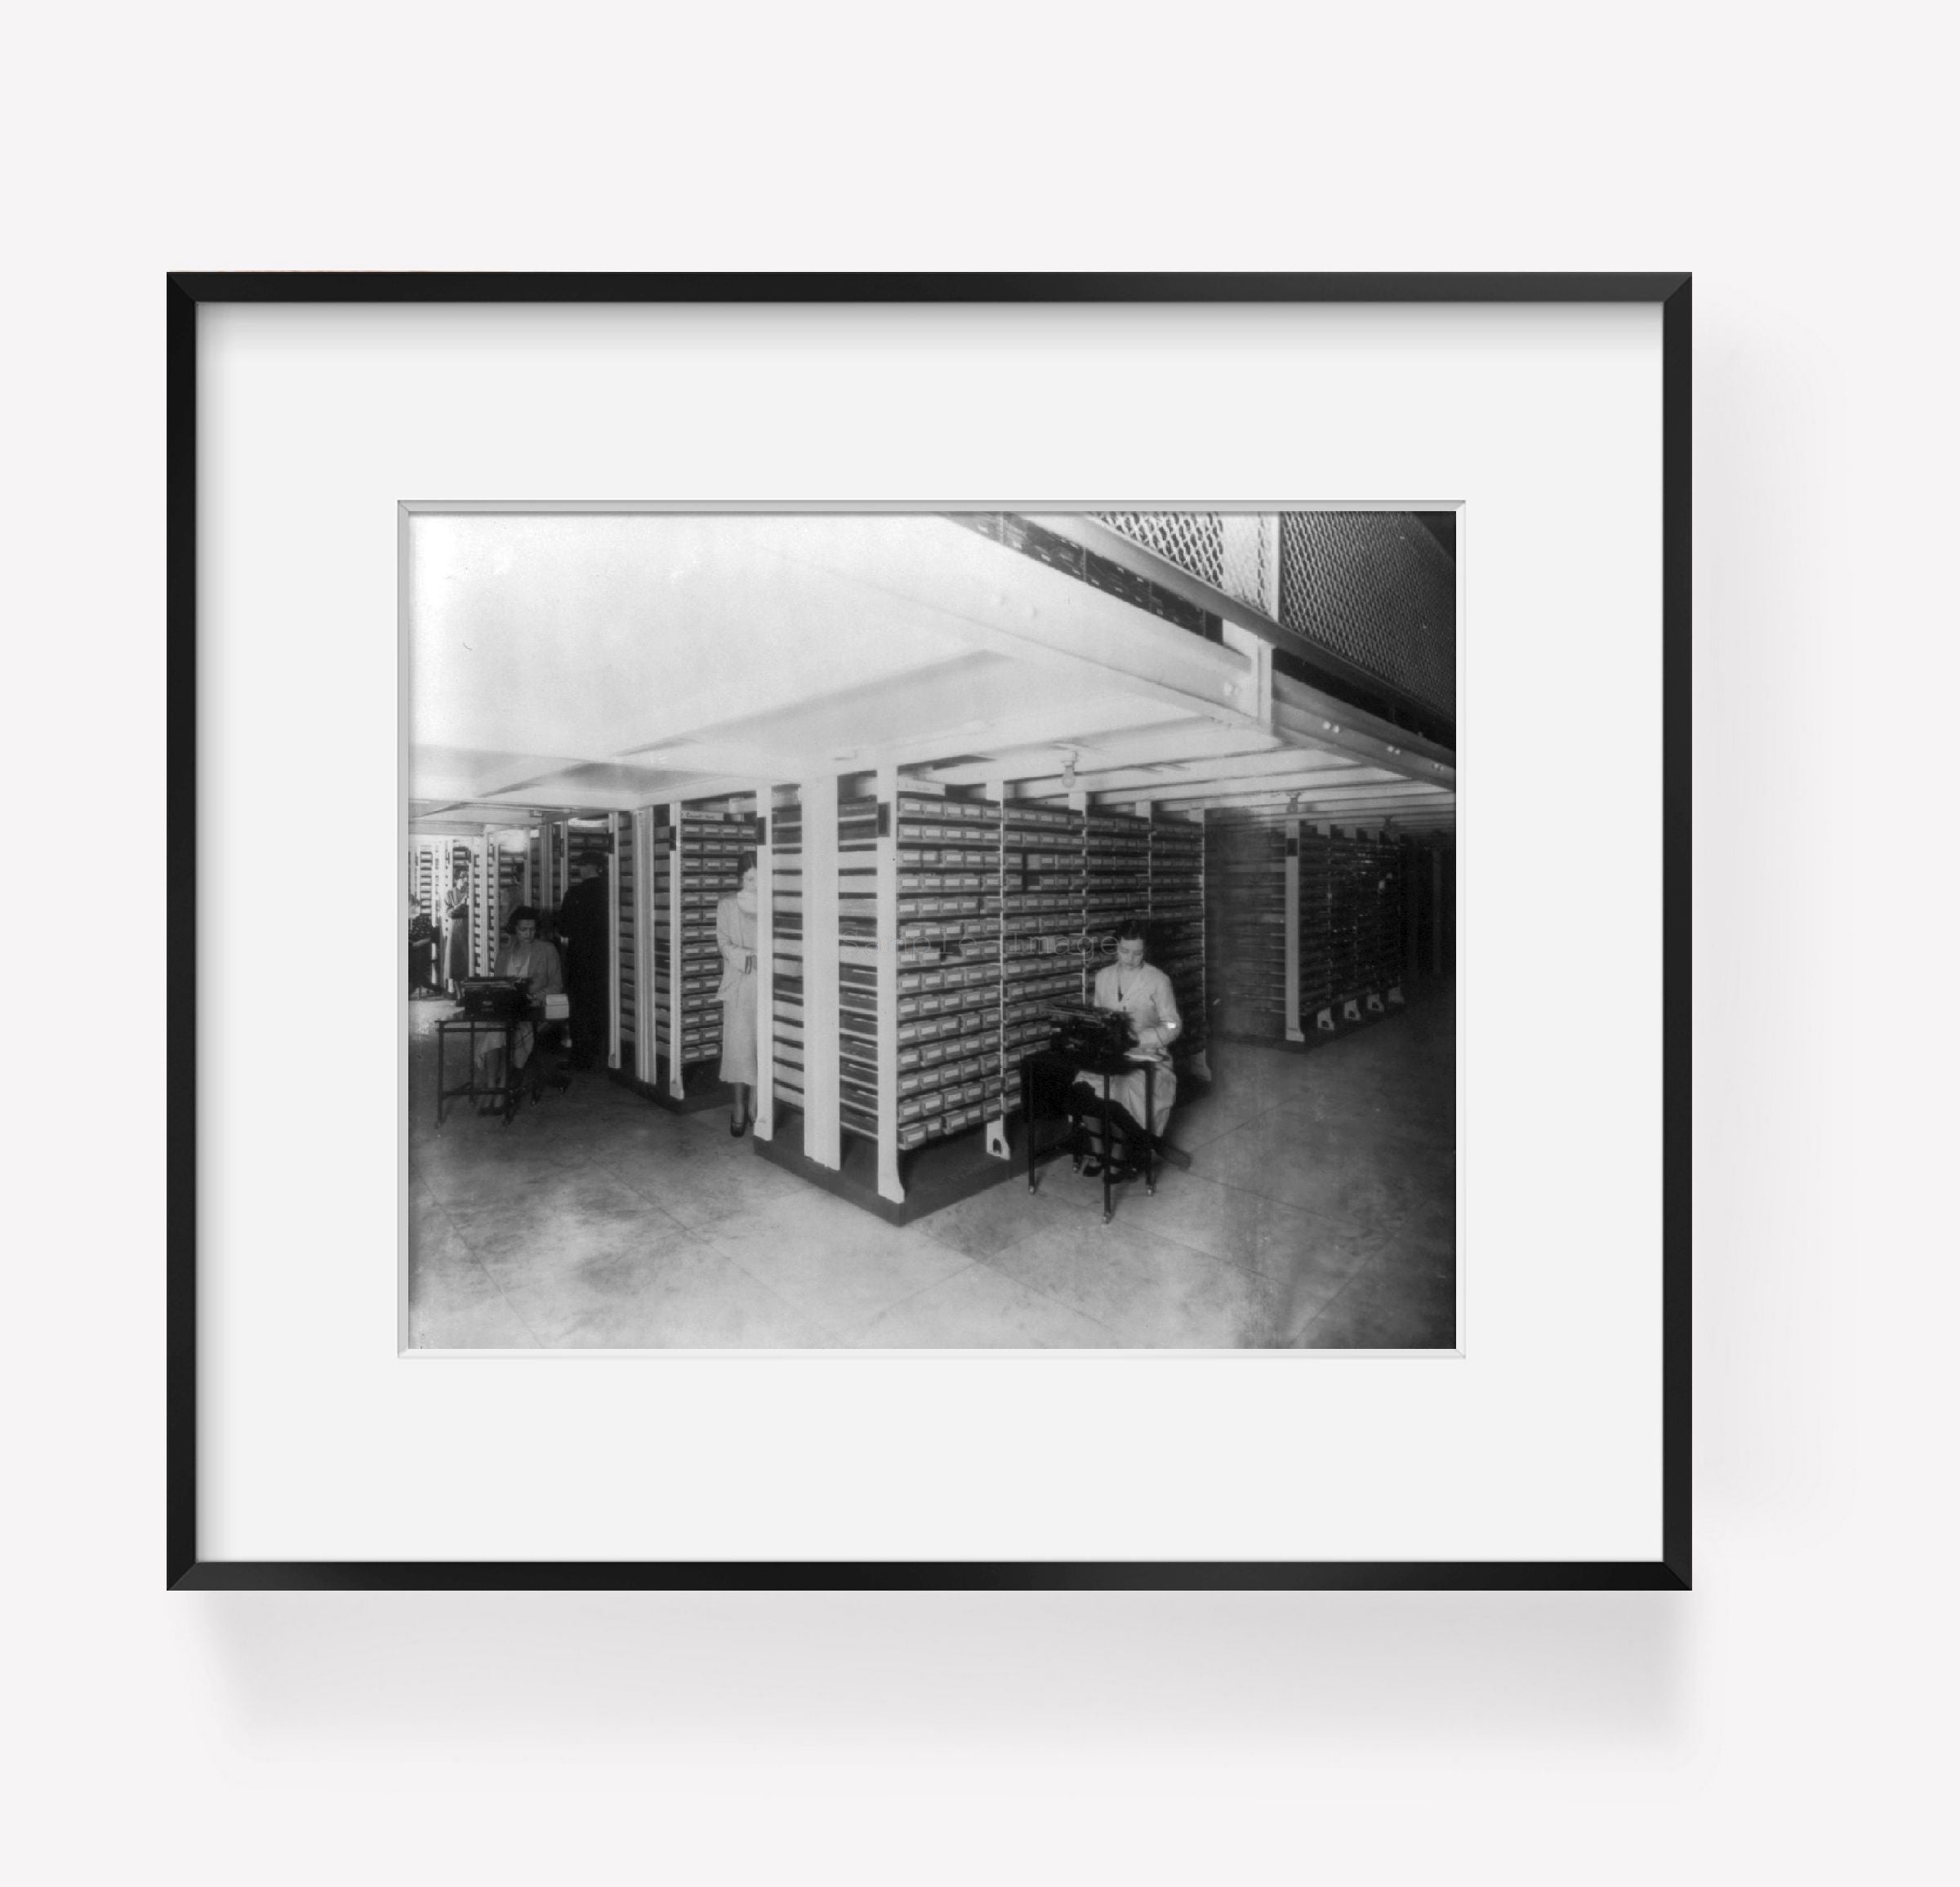 Photo: Temporary quarters on Deck D, National Union Catalog Office, Library of Con